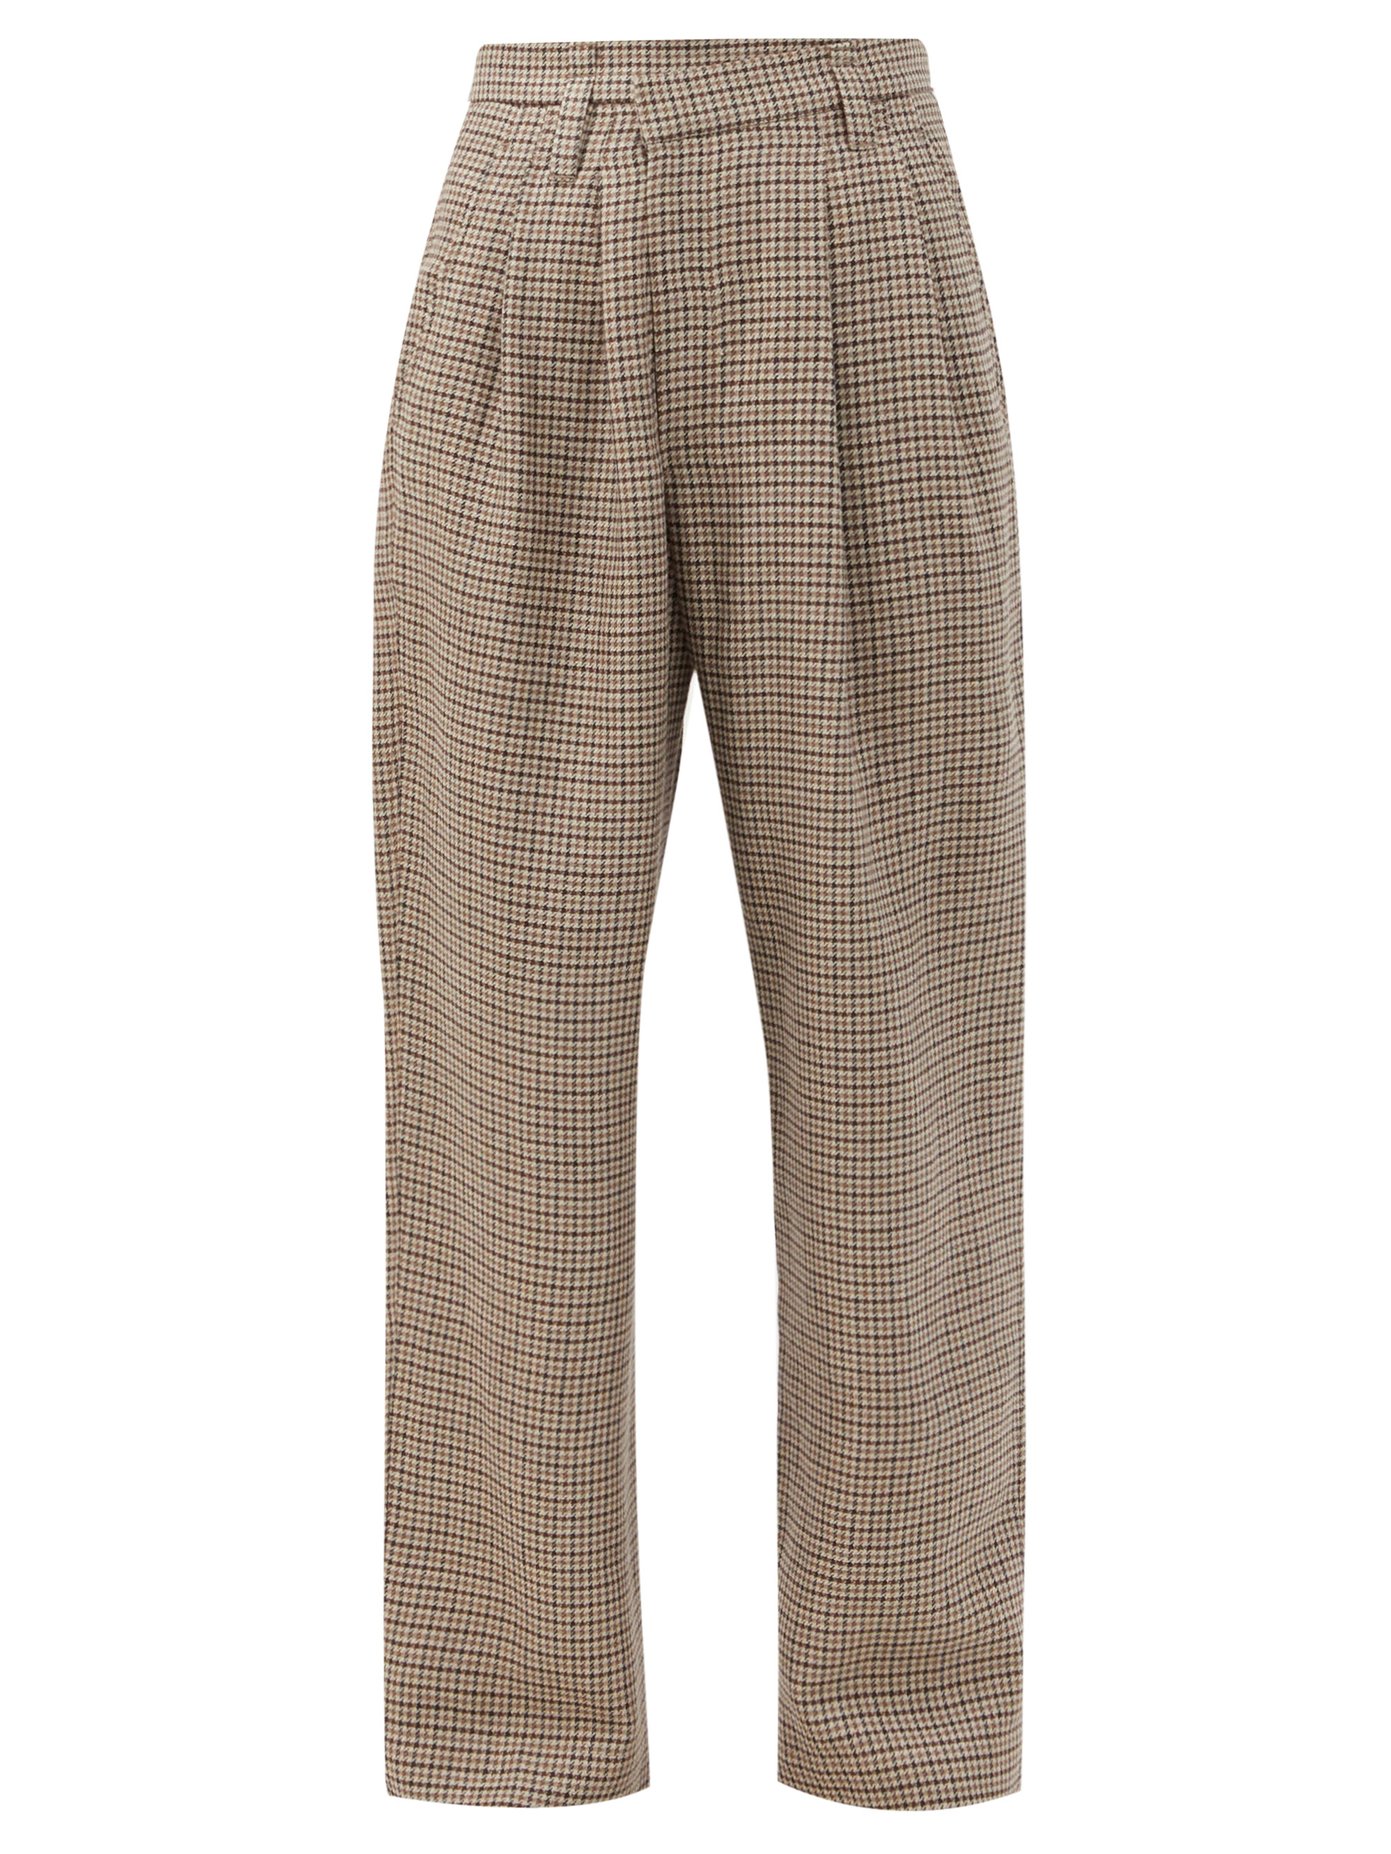 Asymmetric-waist checked linen-blend trousers by Brunello Cucinelli, available on matchesfashion.com for £1477 Jennifer Lopez Pants Exact Product 